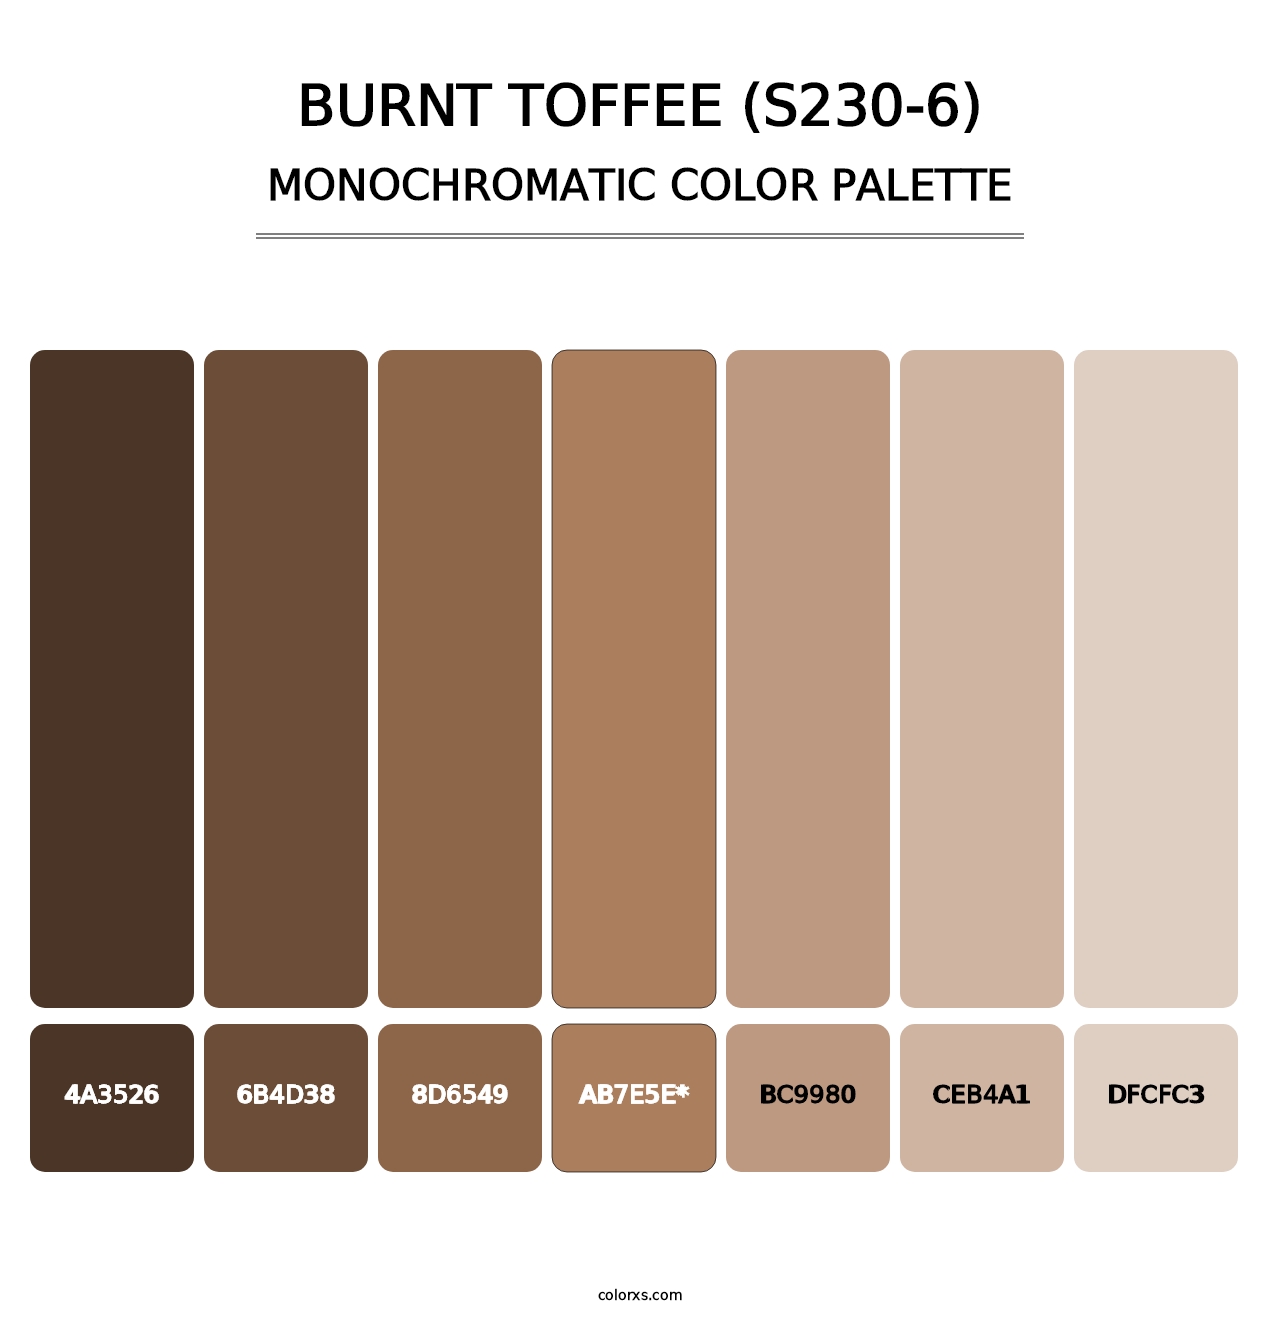 Burnt Toffee (S230-6) - Monochromatic Color Palette